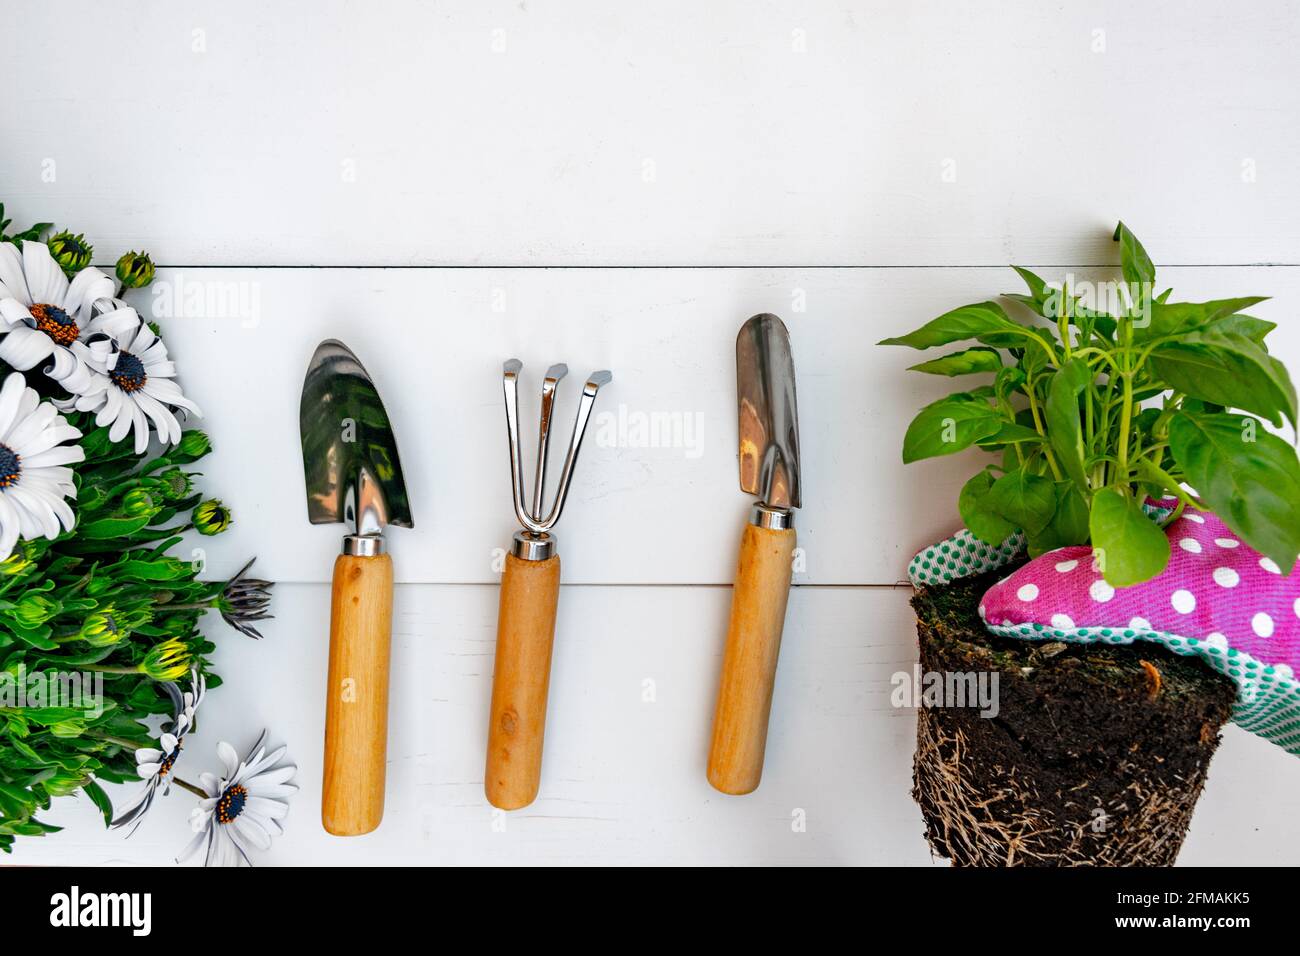 Gardening tools and hand with pink gardening glove holding plant on white rustic boards background.Top view. Stock Photo